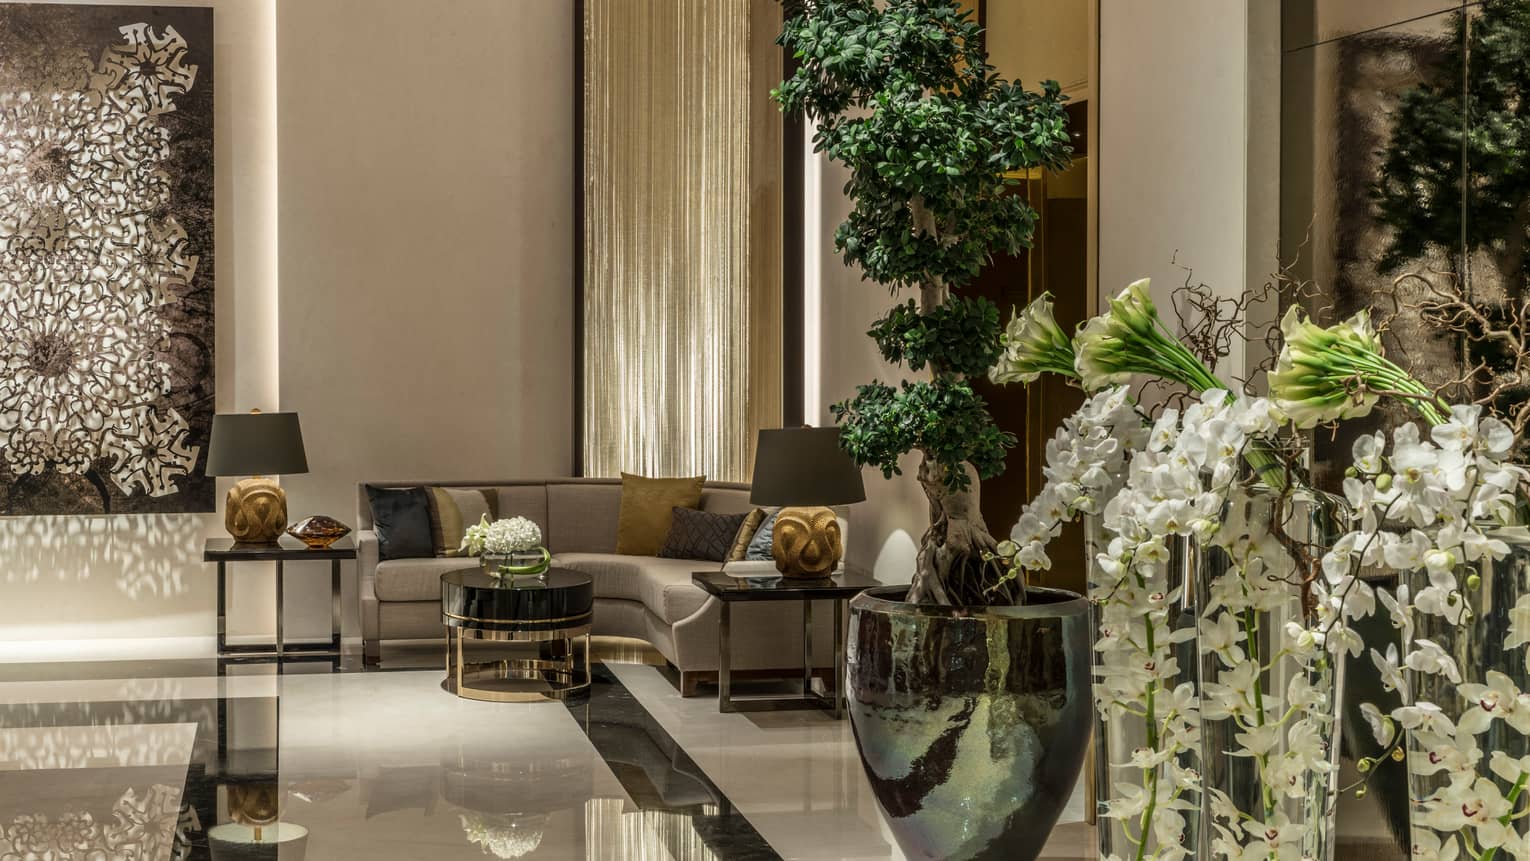 Lobby with curved corner sofa, large vases with fresh flowers, Arabic decor